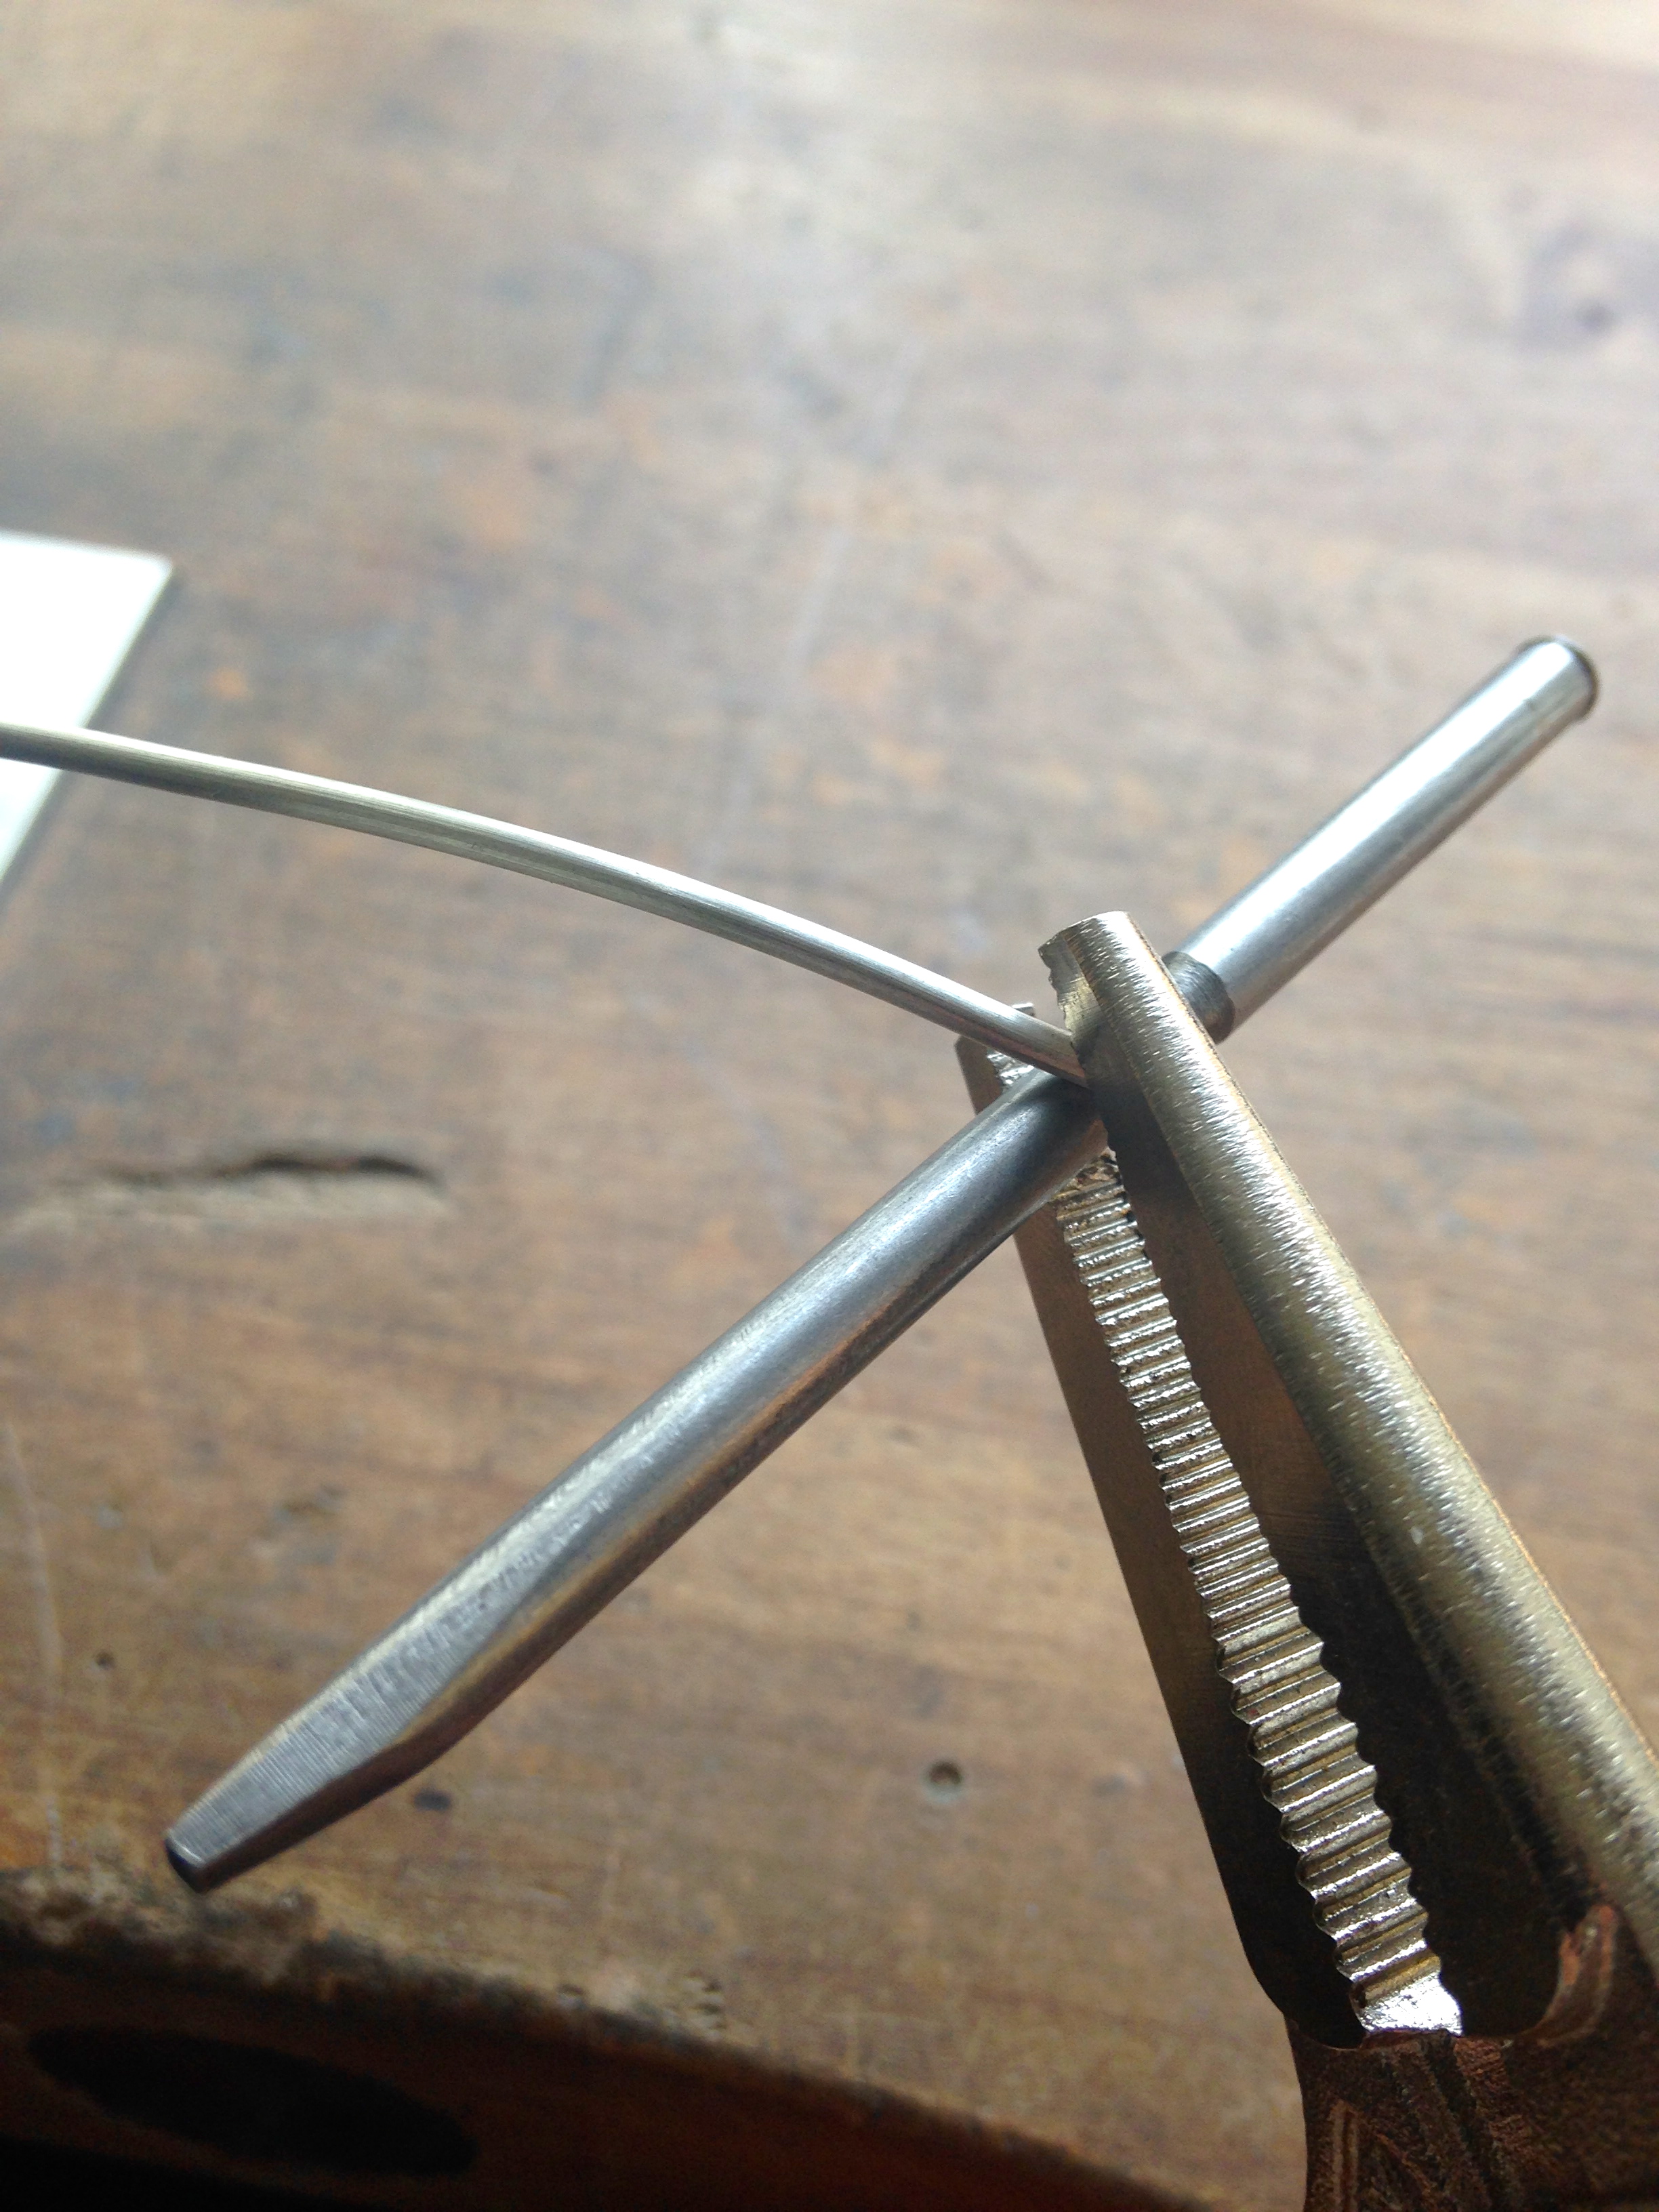 Vice Grip Clamped on Wire for Jewelry Making